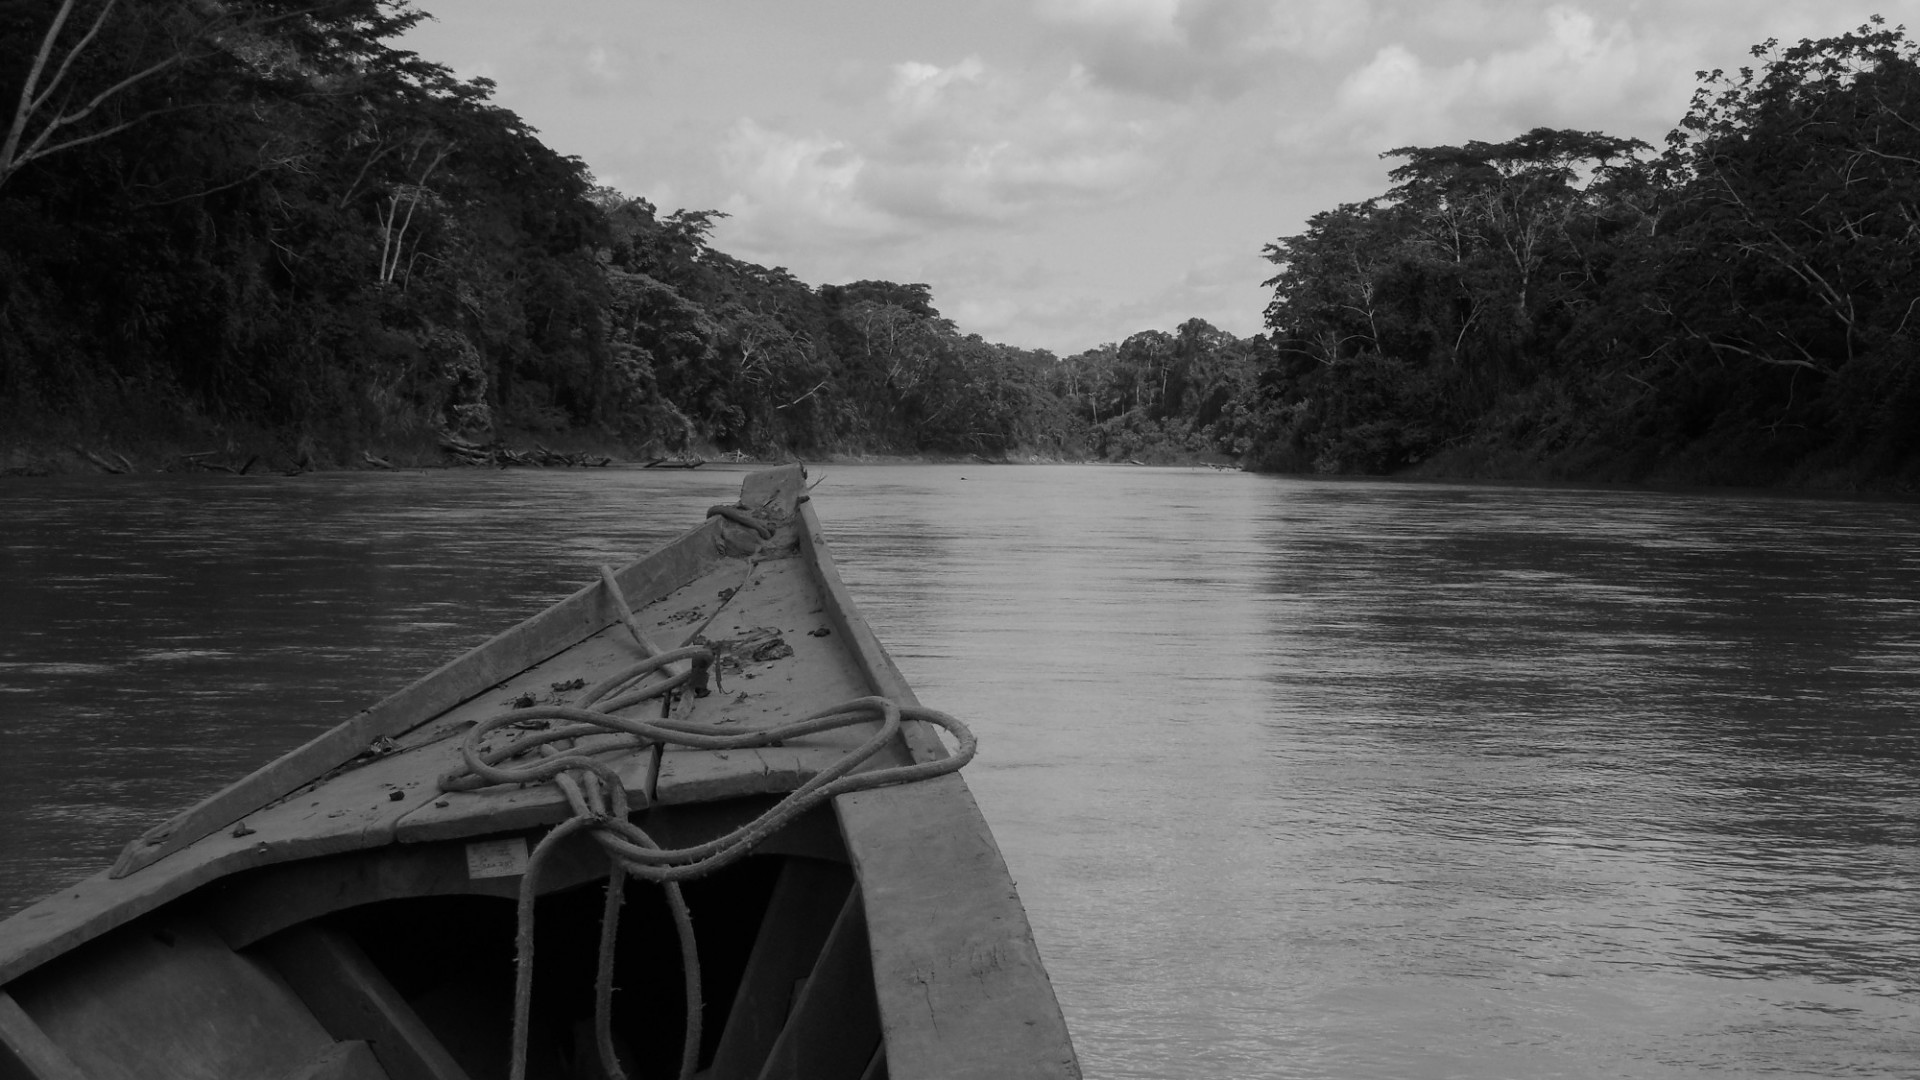 From the river in the Amazon in Peru